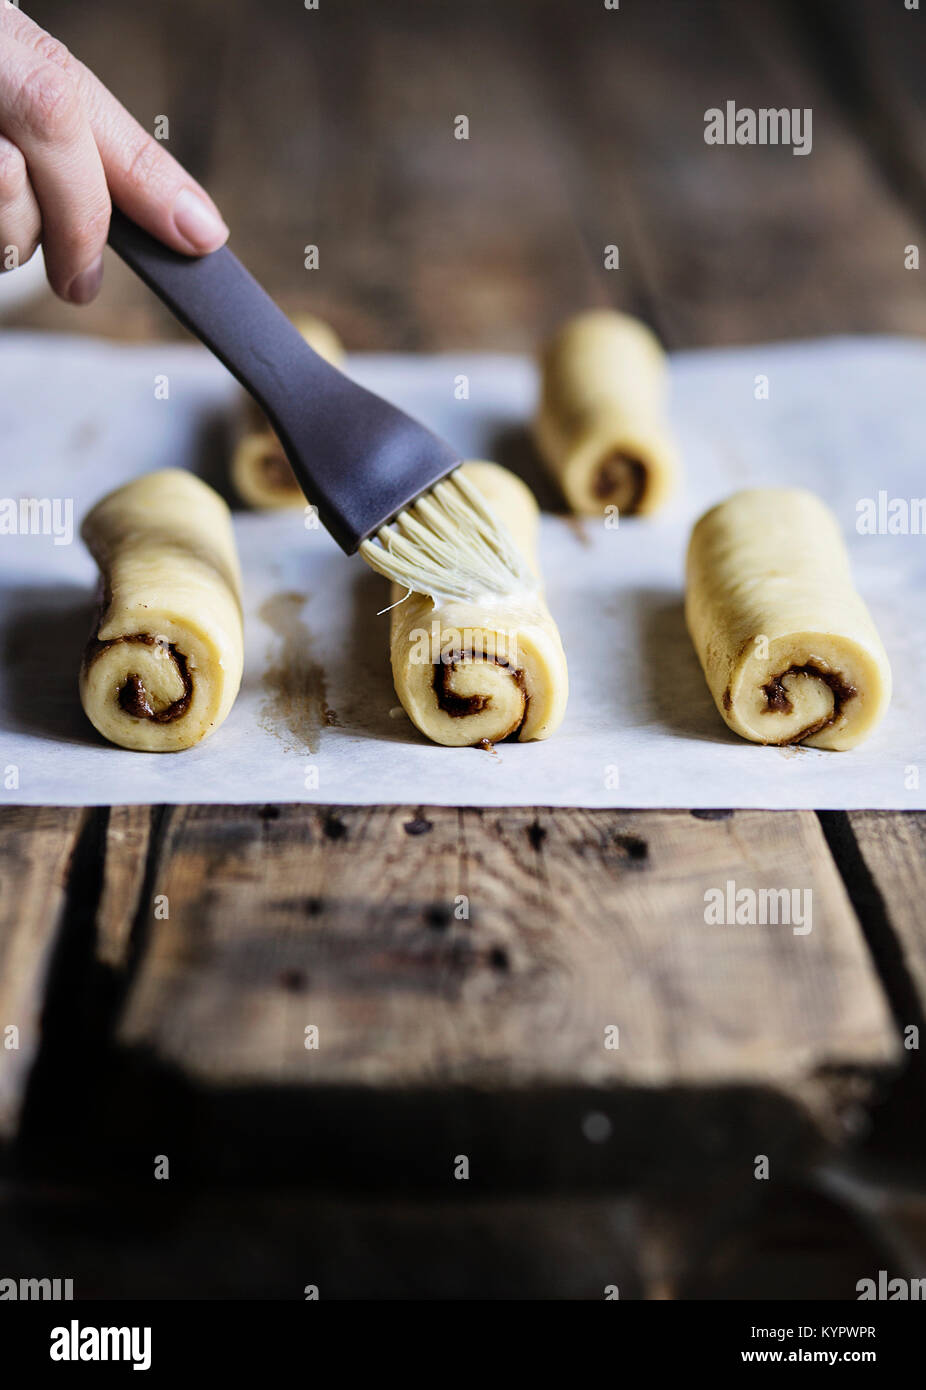 Raw cinnamon buns on wooden table before baking Stock Photo